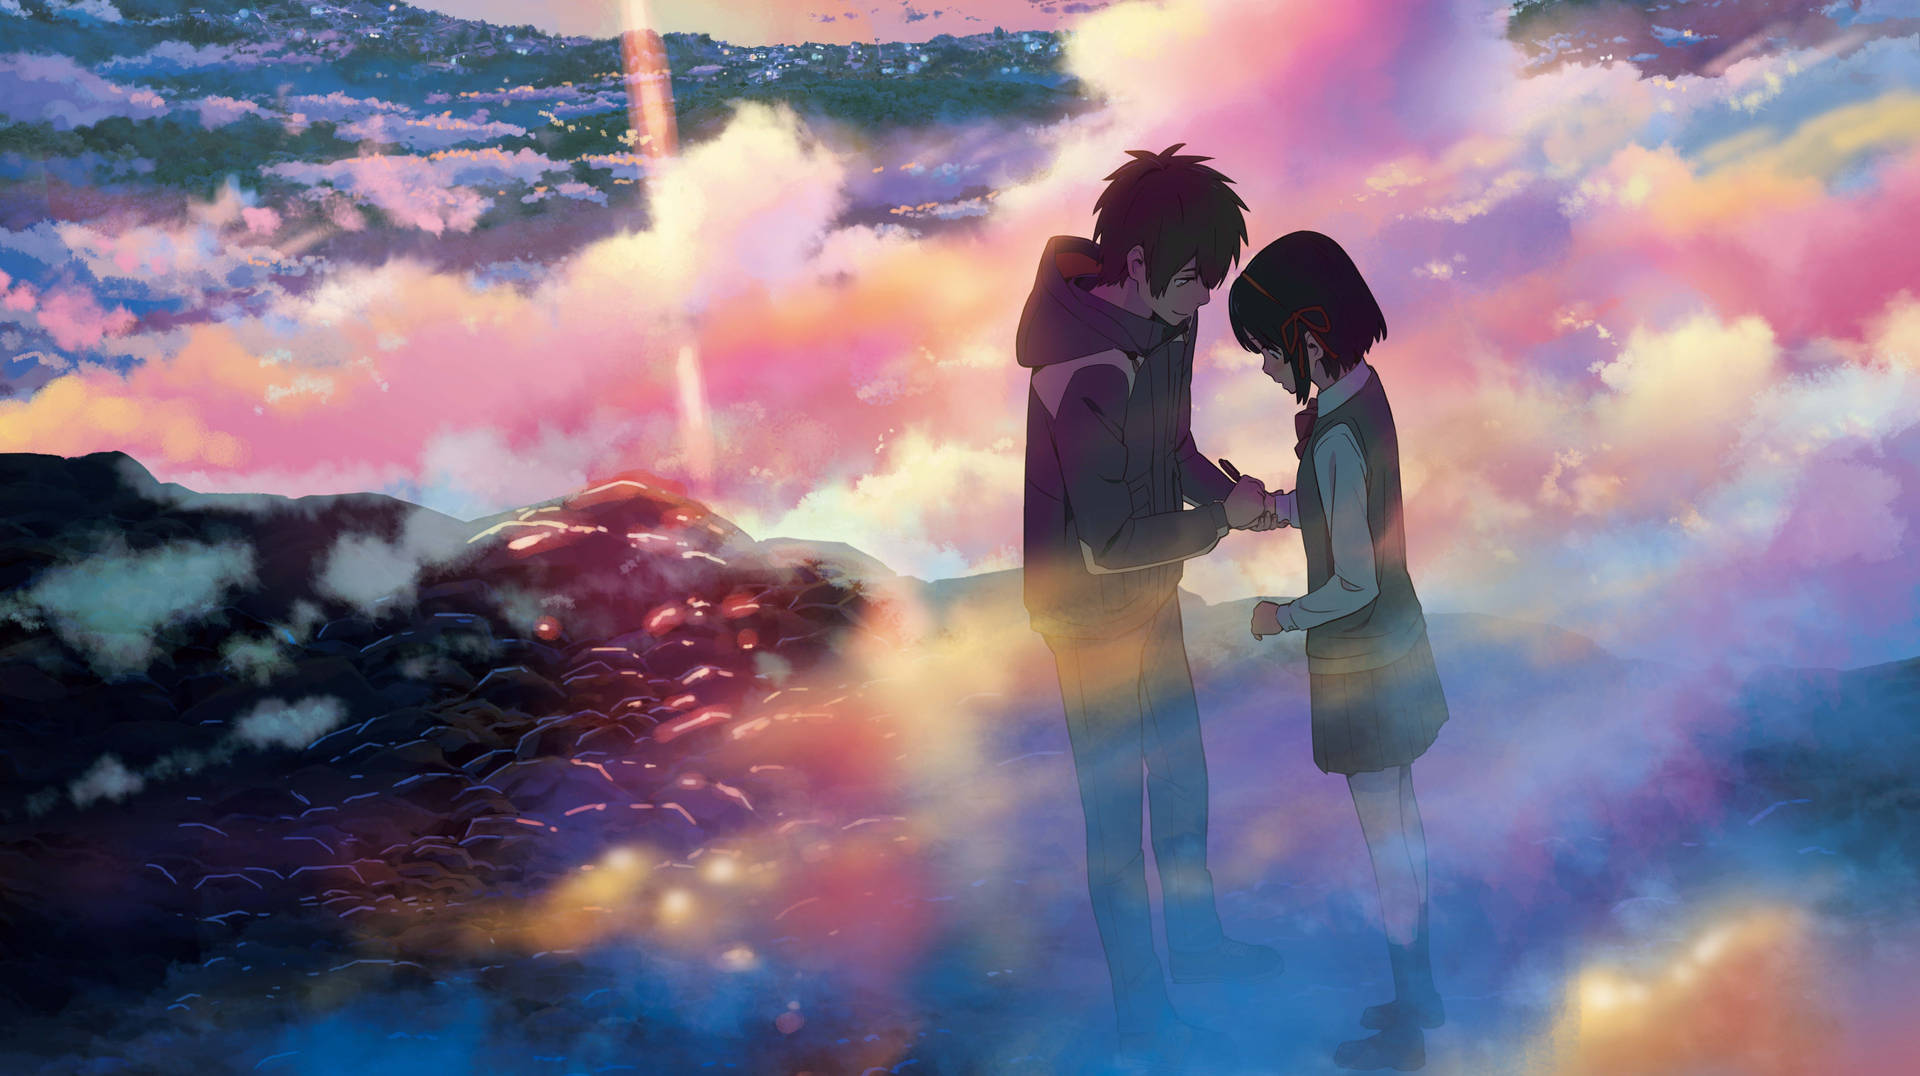 Taki and Mitsuha Holding Hands in the Film Your Name Wallpaper